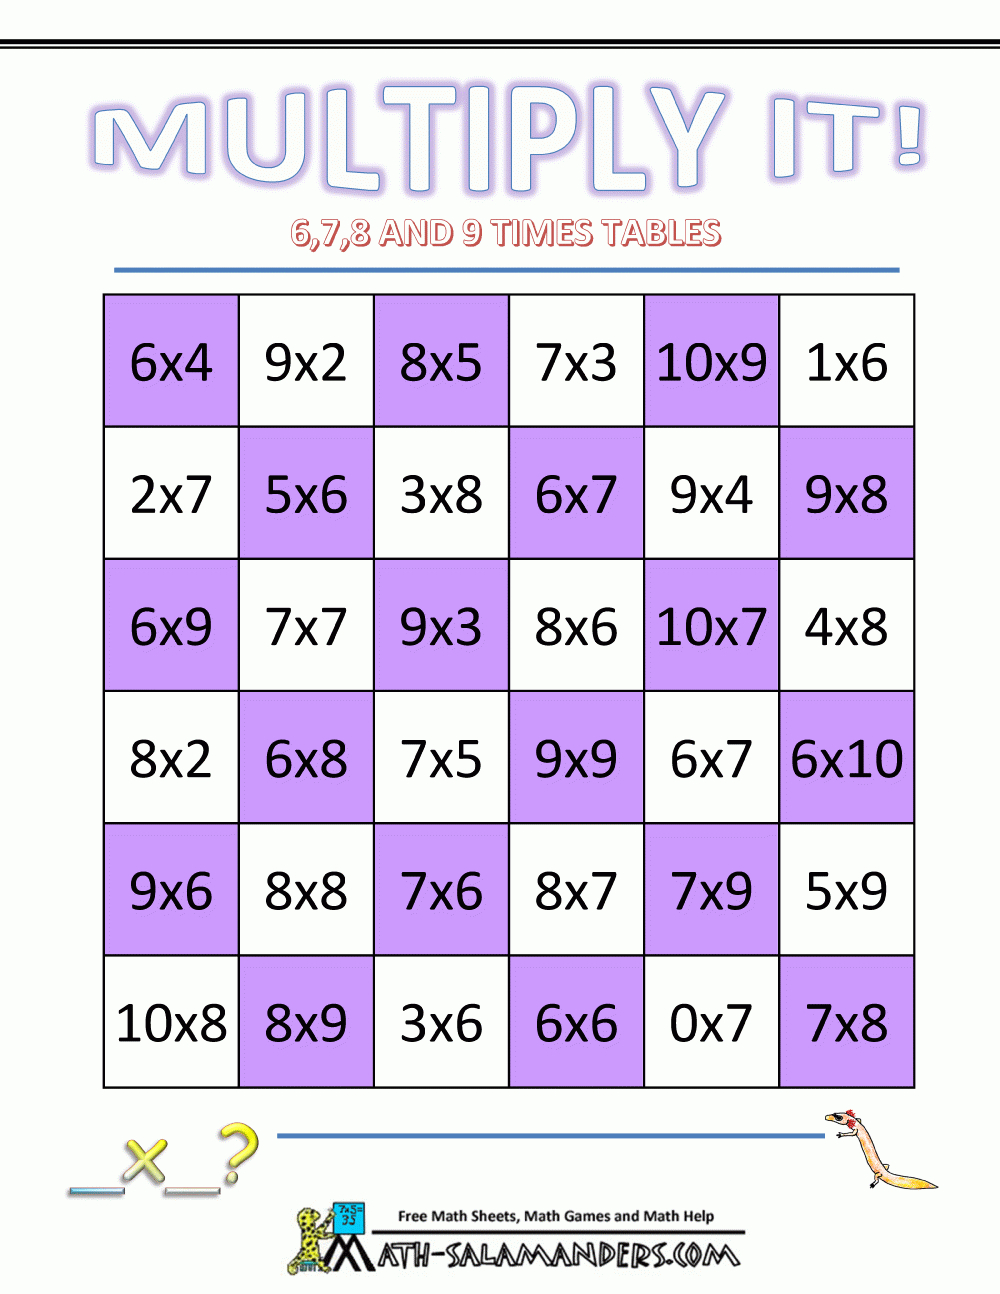 Multiplication Math Games with Printable Multiplication Matching Game